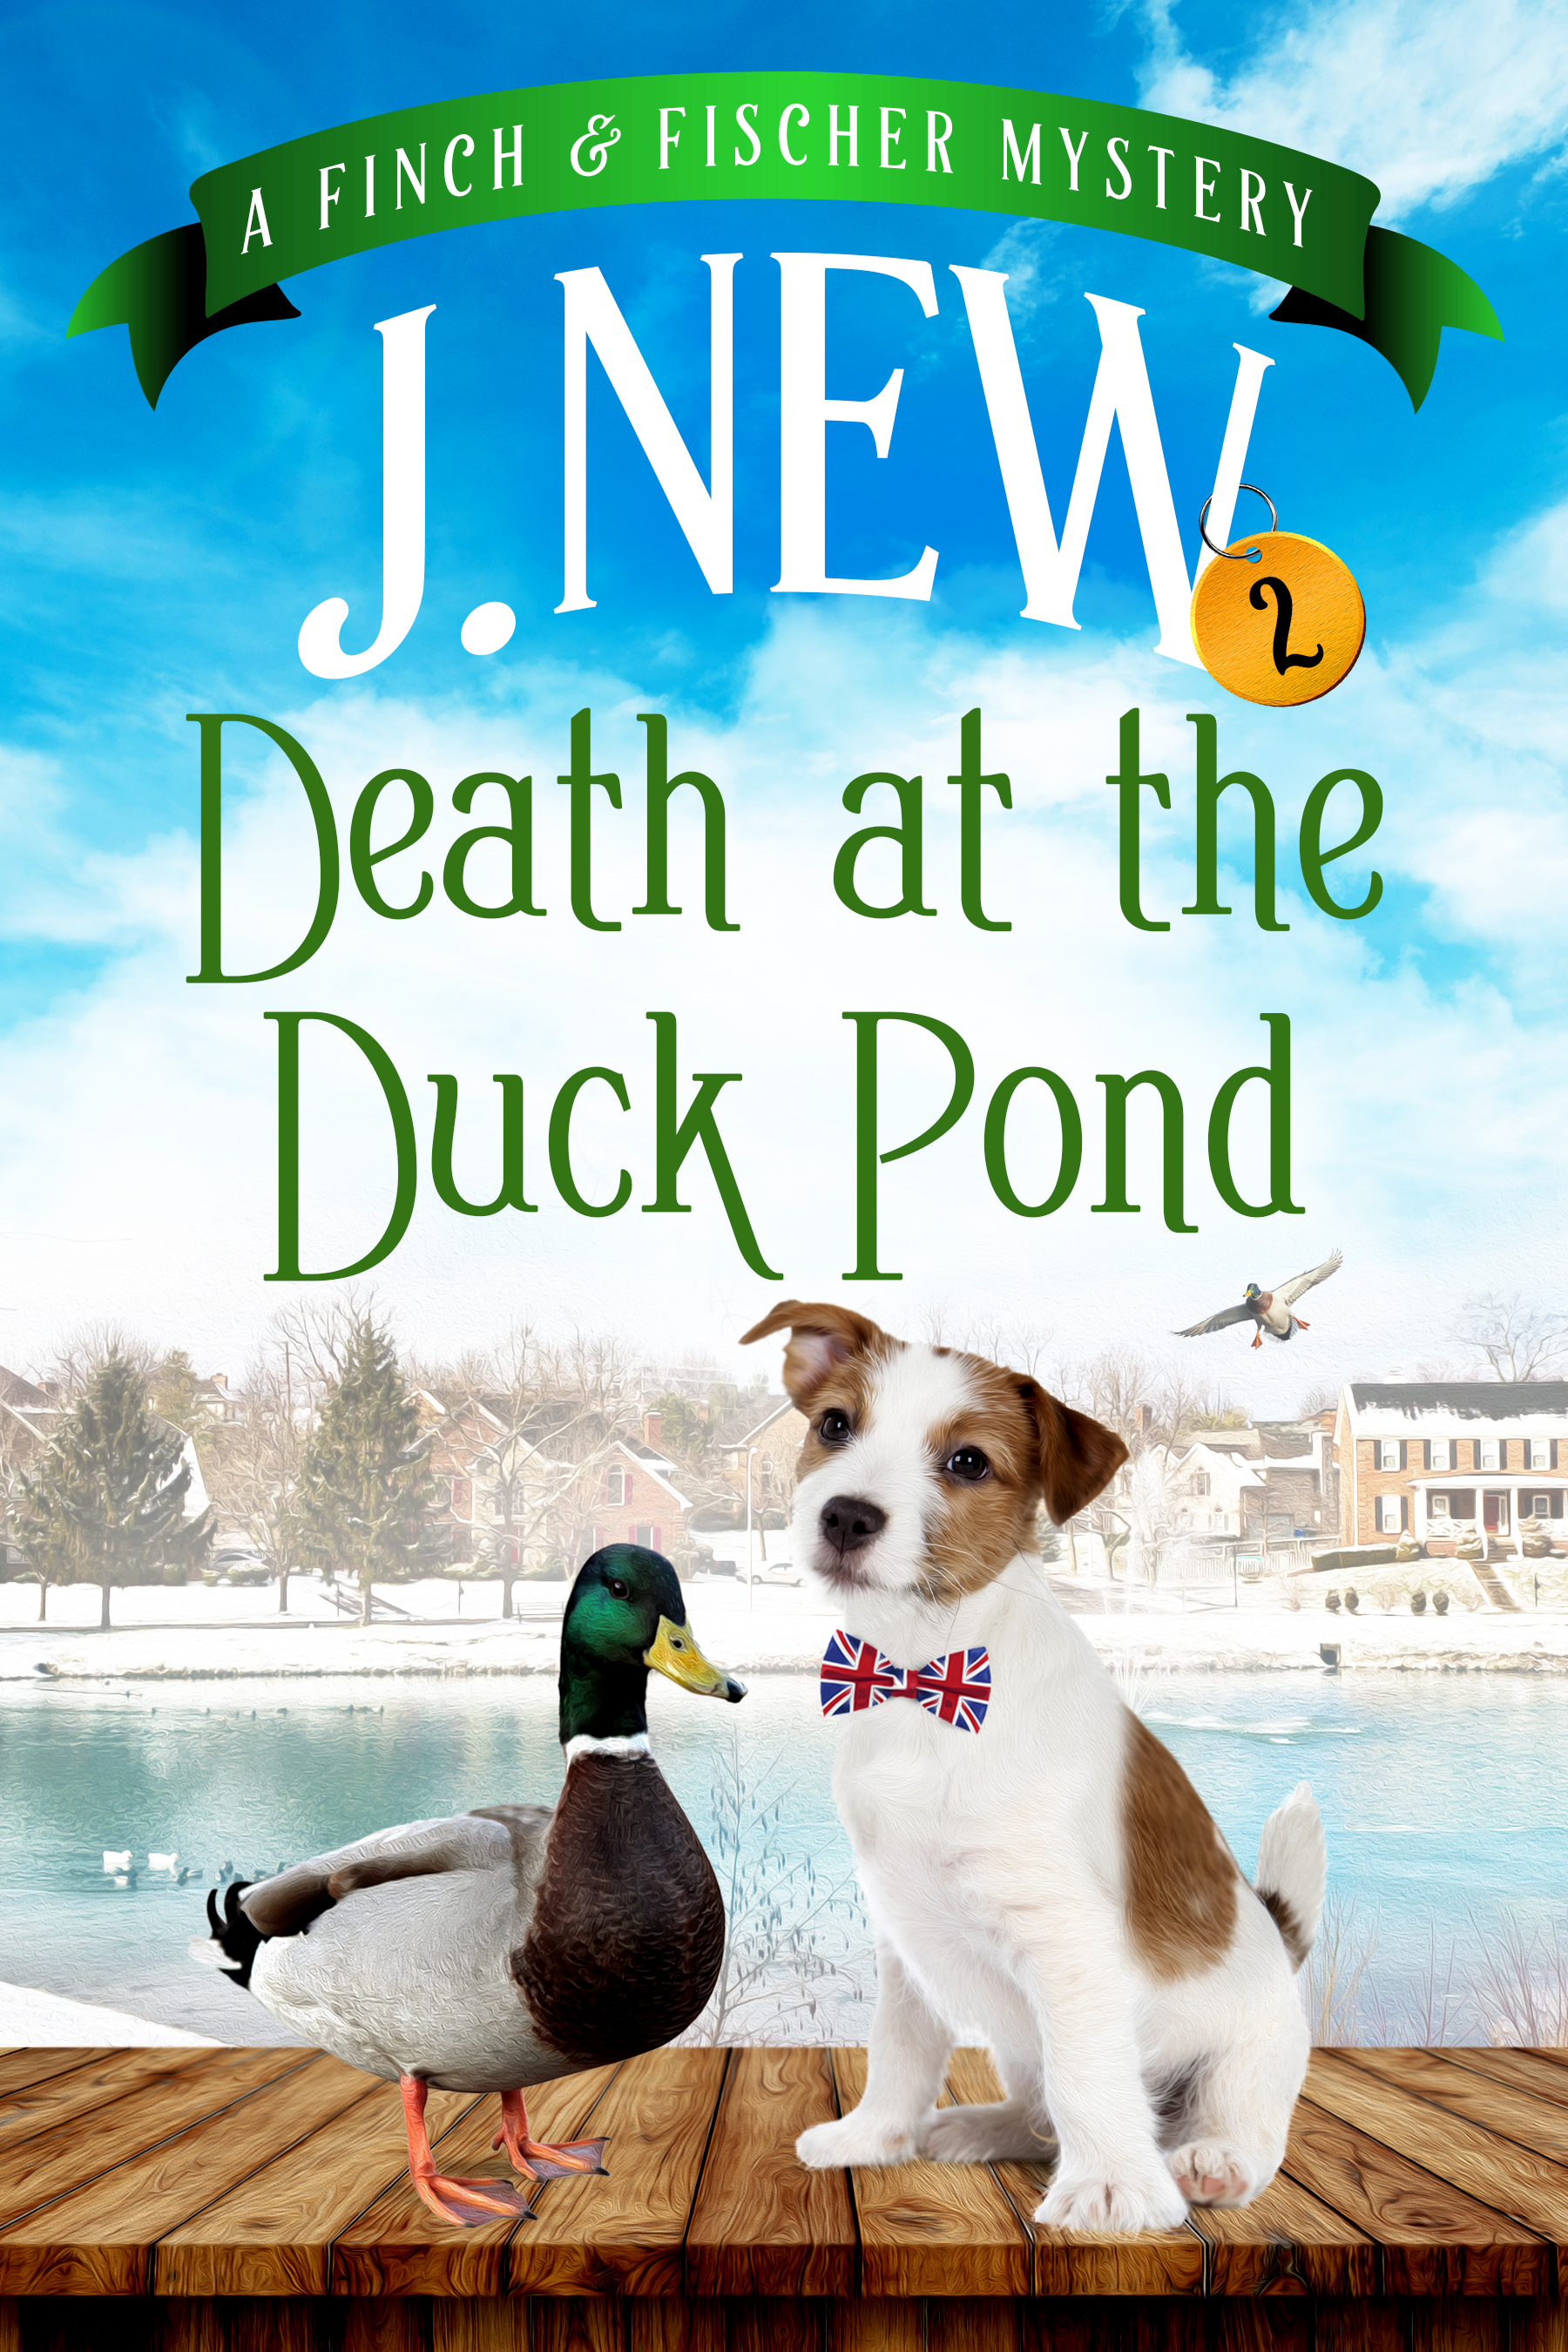 Death at the Duck Pond is the second book in the popular Finch and Fischer British cozy mystery series by author J. New